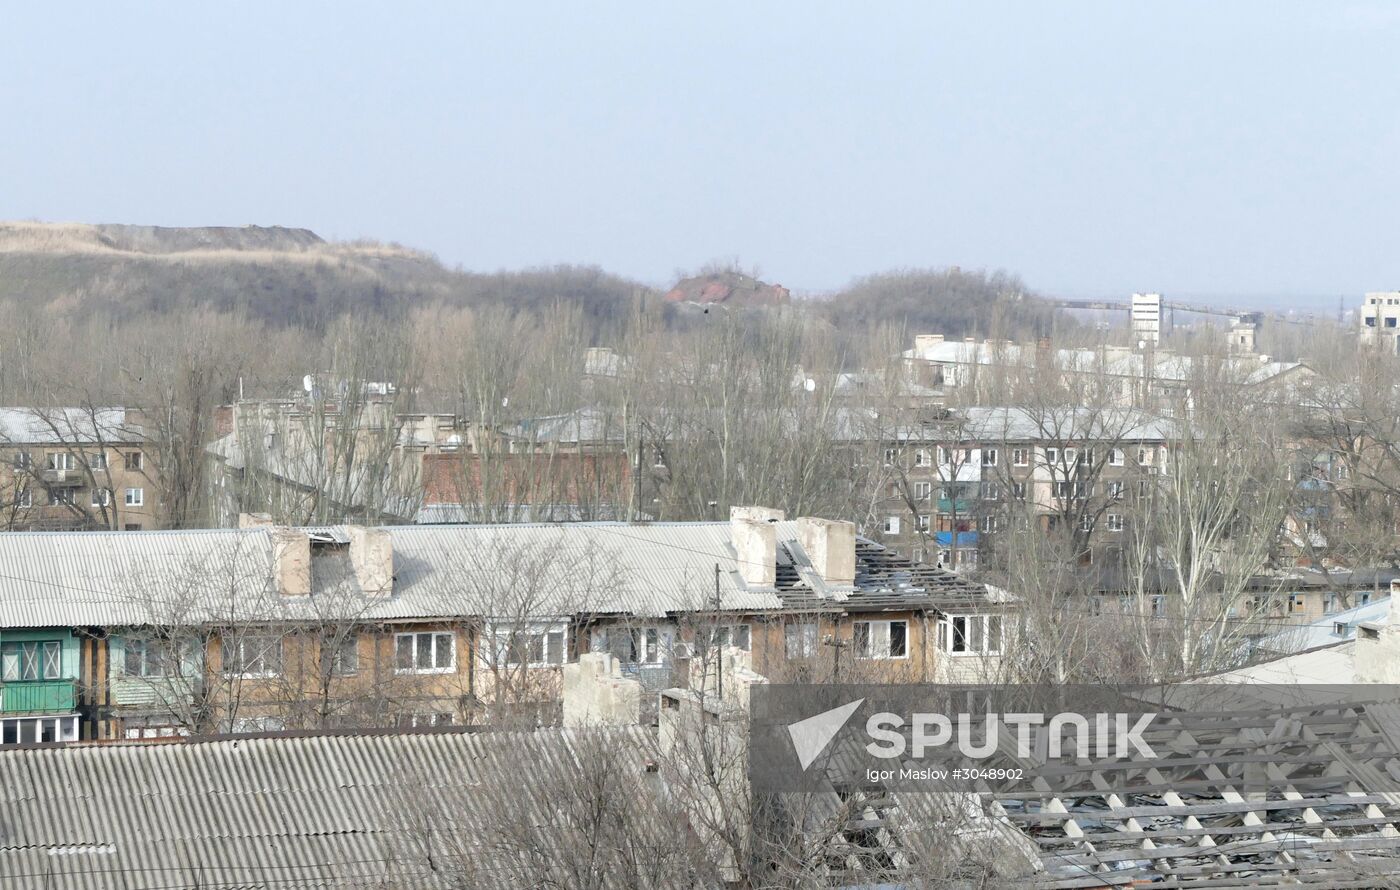 Aftermath of shelling in the town of Luganskoye in the Donetsk Region